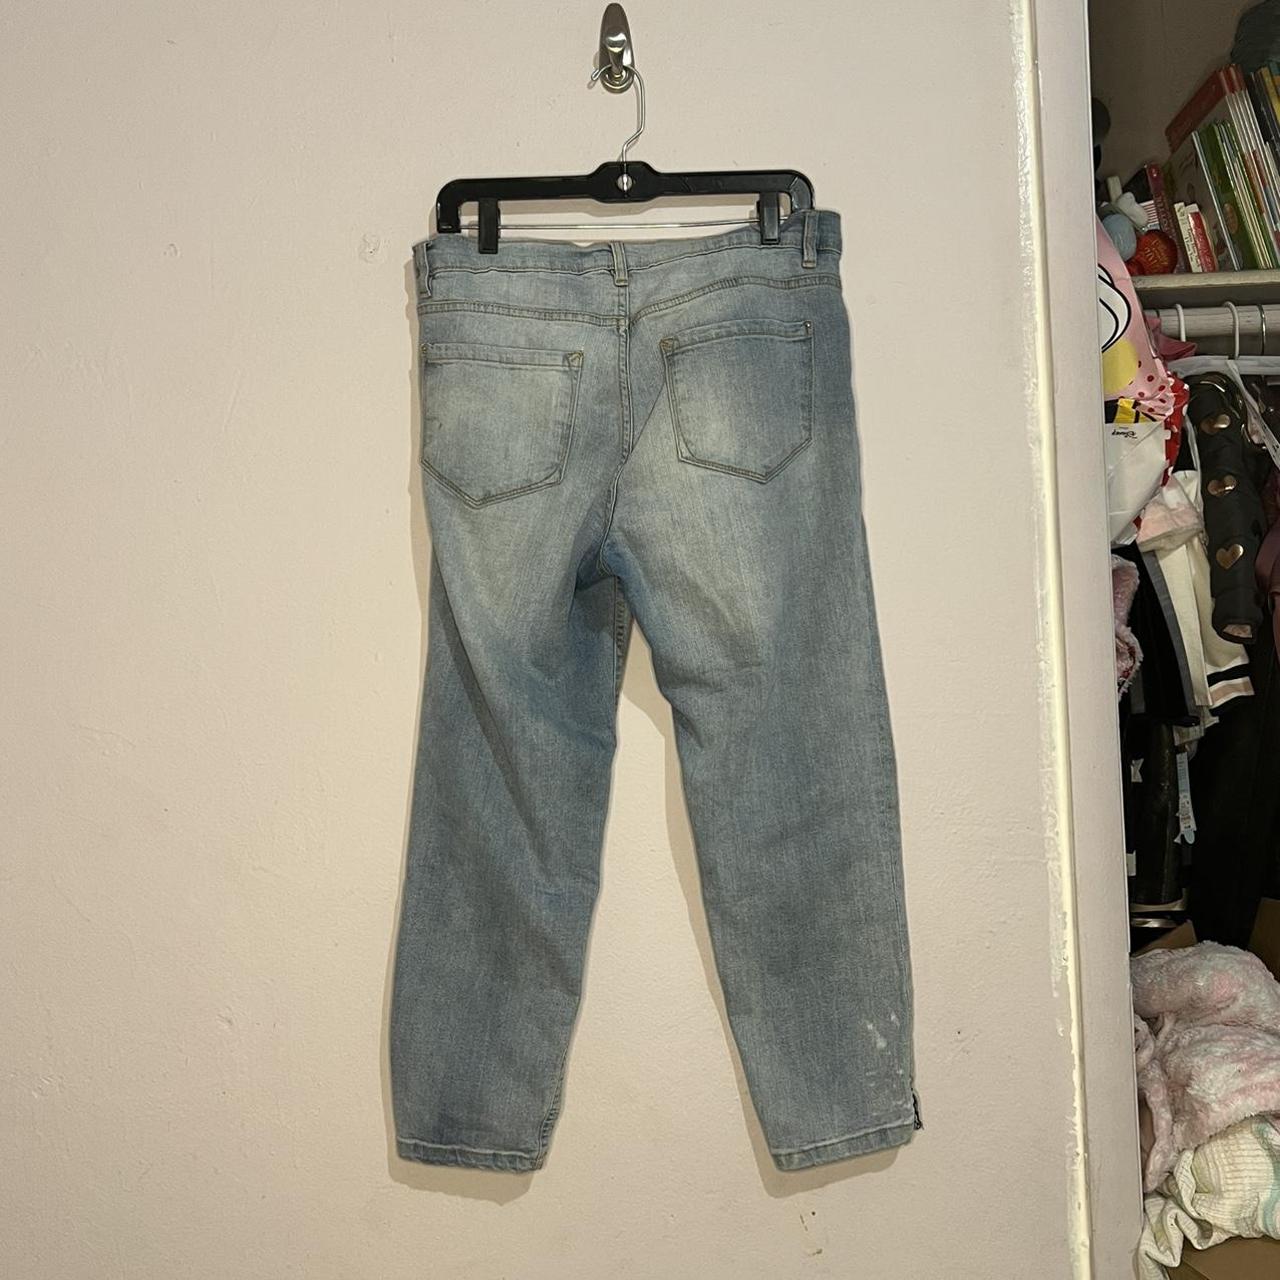 Product Image 2 - Kensie Jeans Ankle Length
Light wash